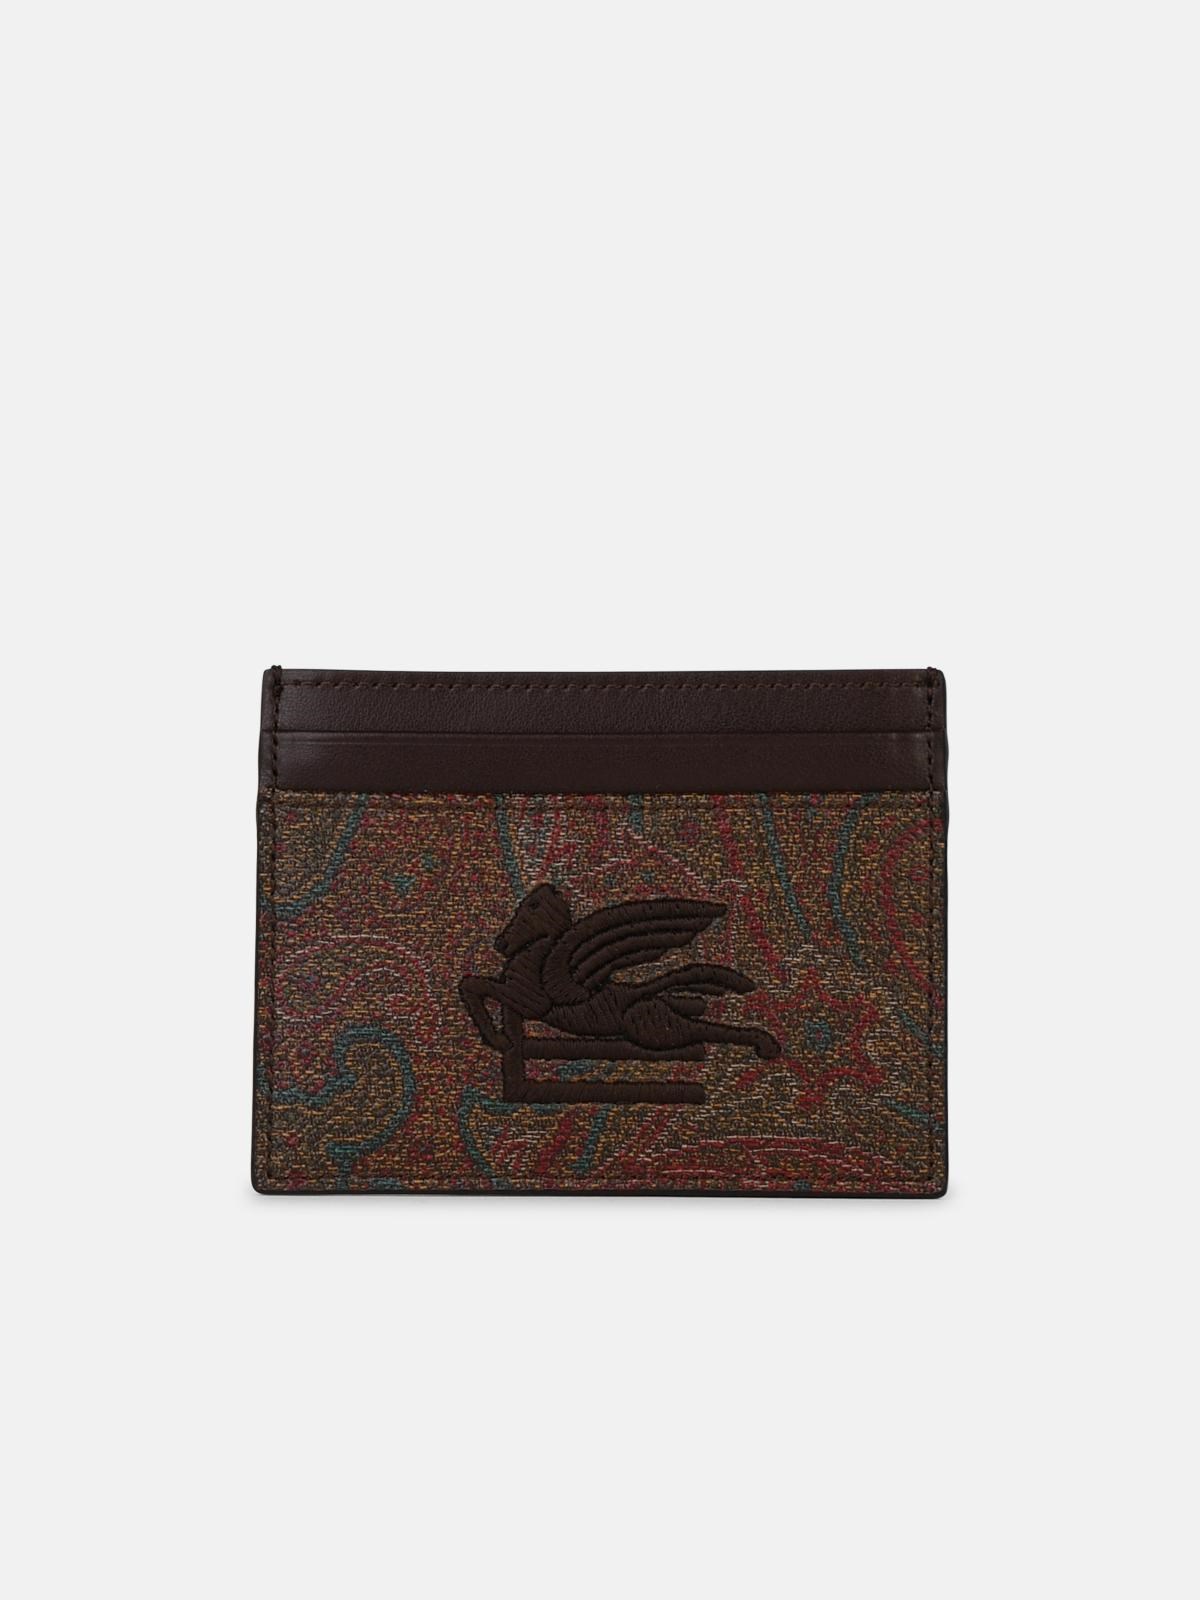 Etro 'arnica' Brown Leather Card Holder